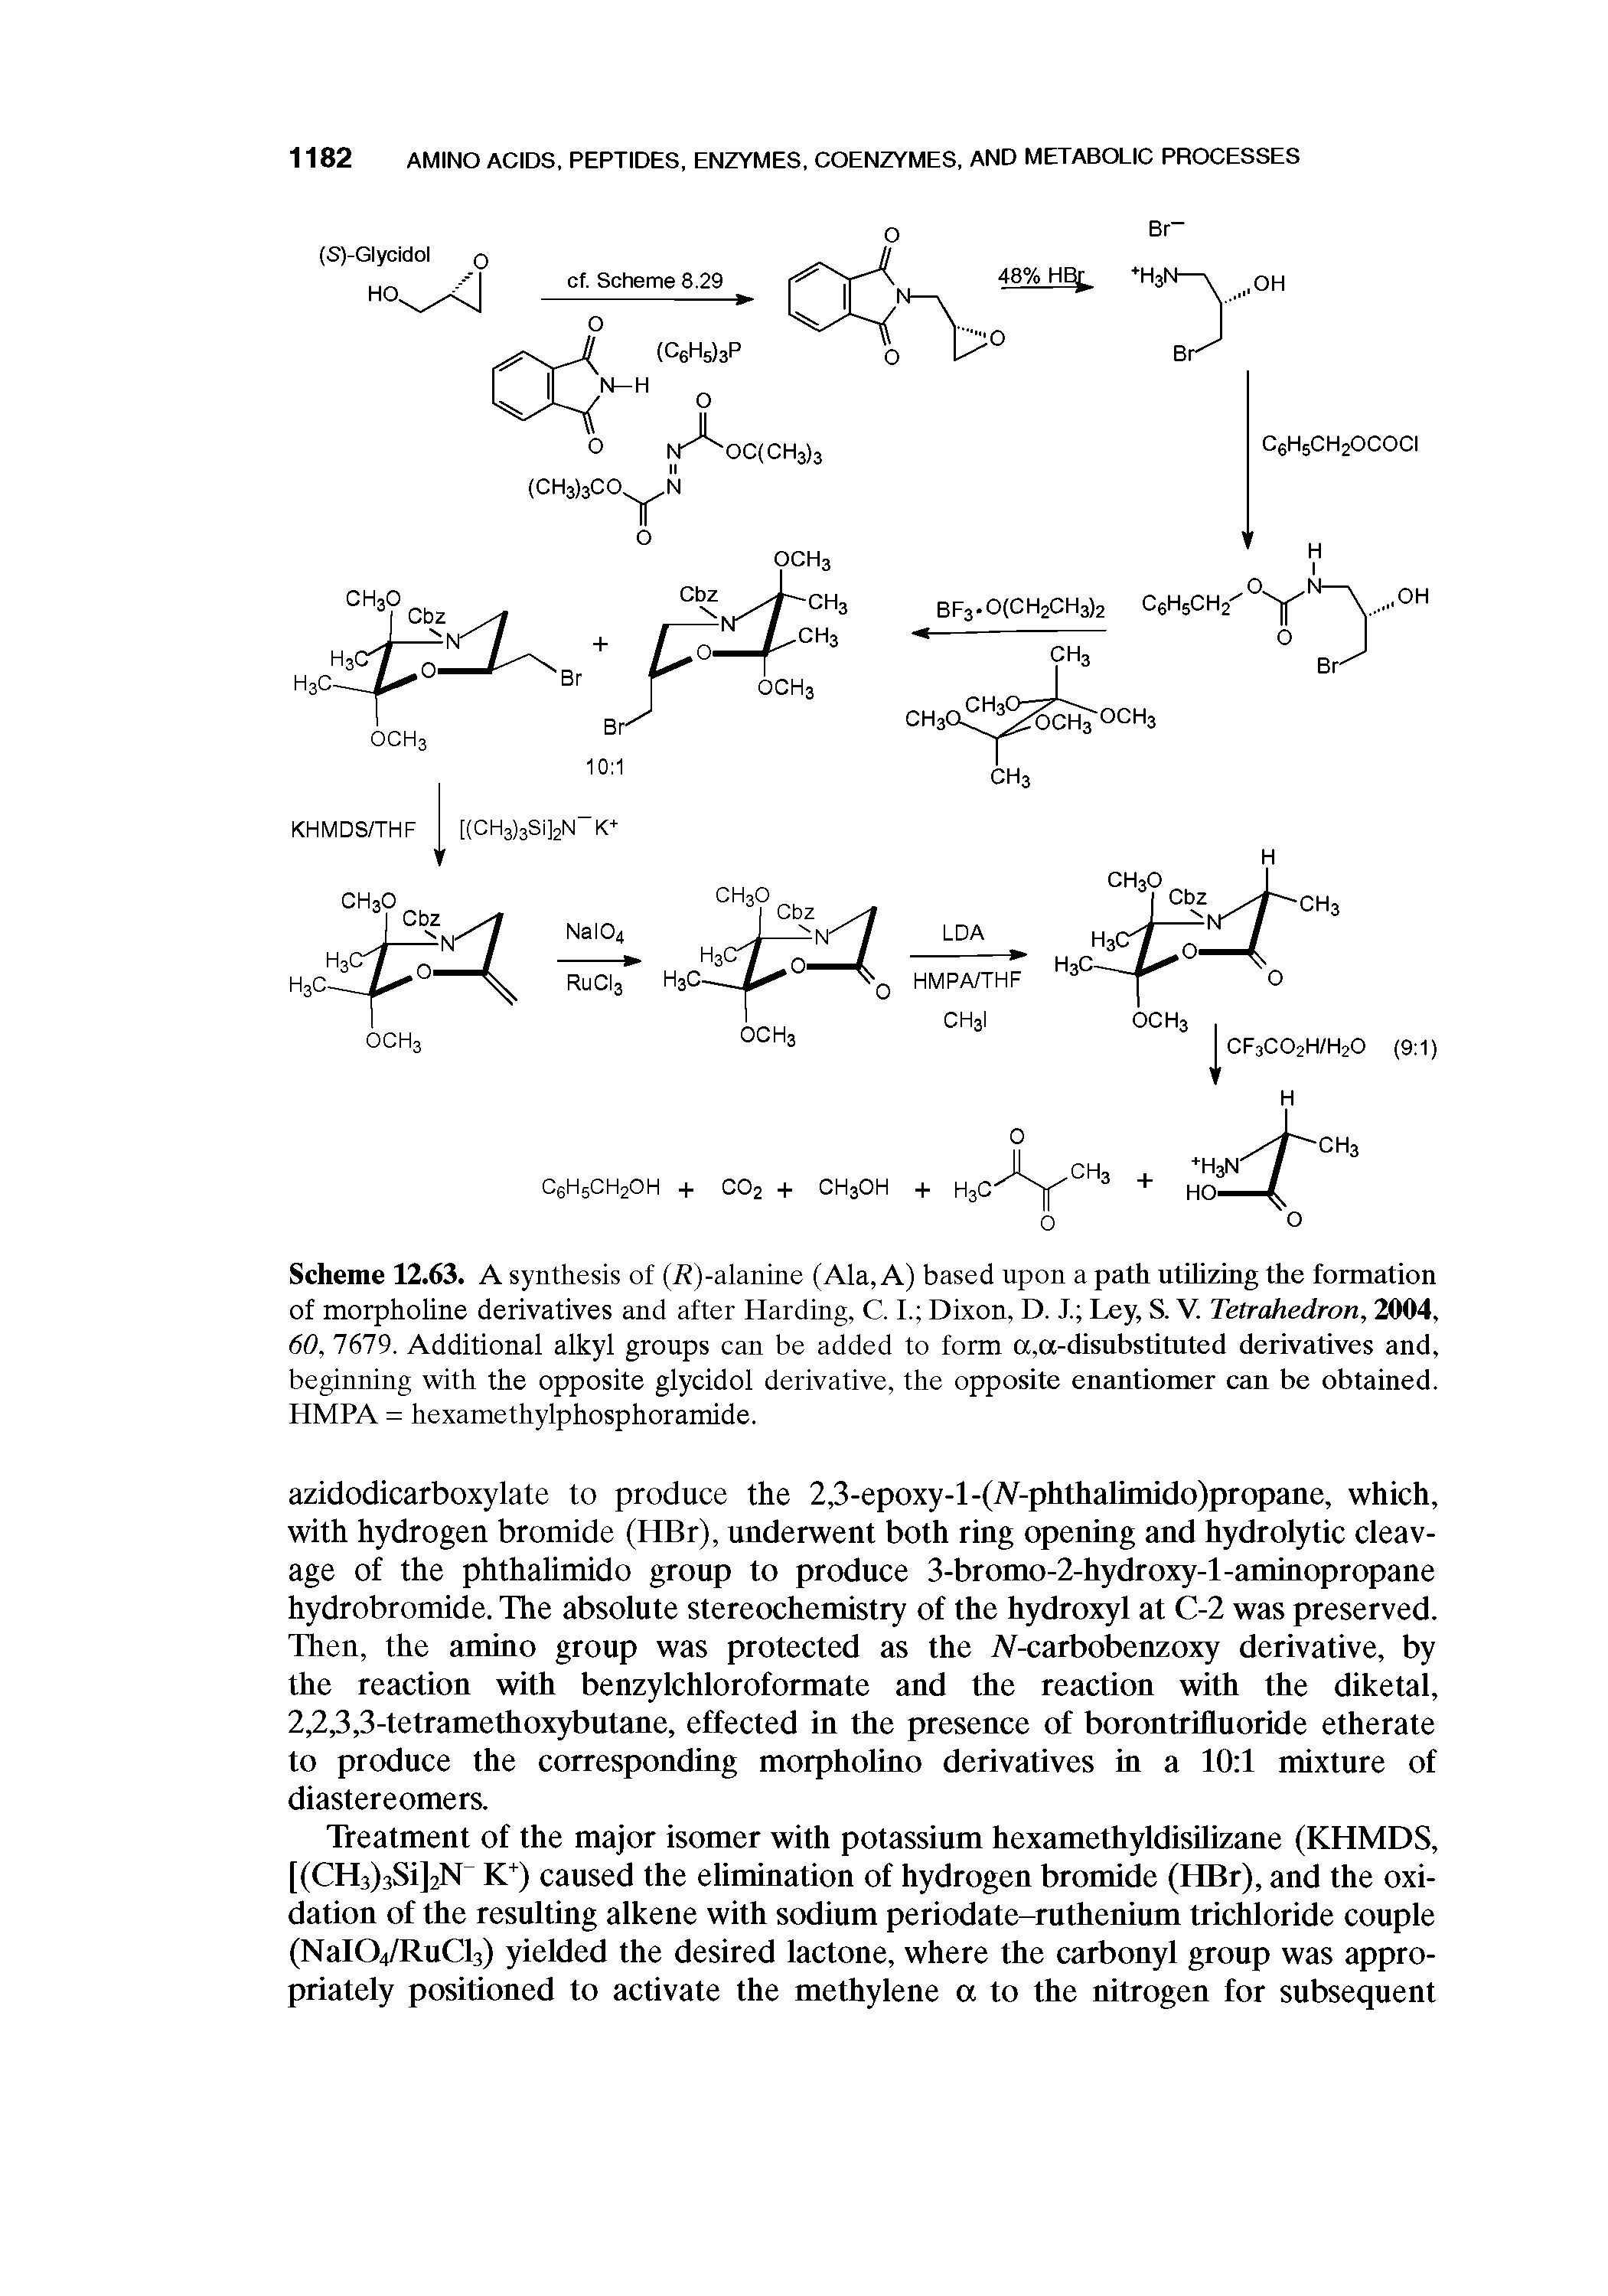 Scheme 12.63. A synthesis of (i )-alanine (Ala, A) based upon a path utilizing the formation of morpholine derivatives and after Harding, C, L Dixon, D, J, Ley, S. V. Tetrahedron, 2004, 60,1619. Additional alkyl groups can be added to form a,a-disubstituted derivatives and, beginning with the opposite glycidol derivative, the opposite enantiomer can be obtained. HMPA = hexamethylphosphoramide,...